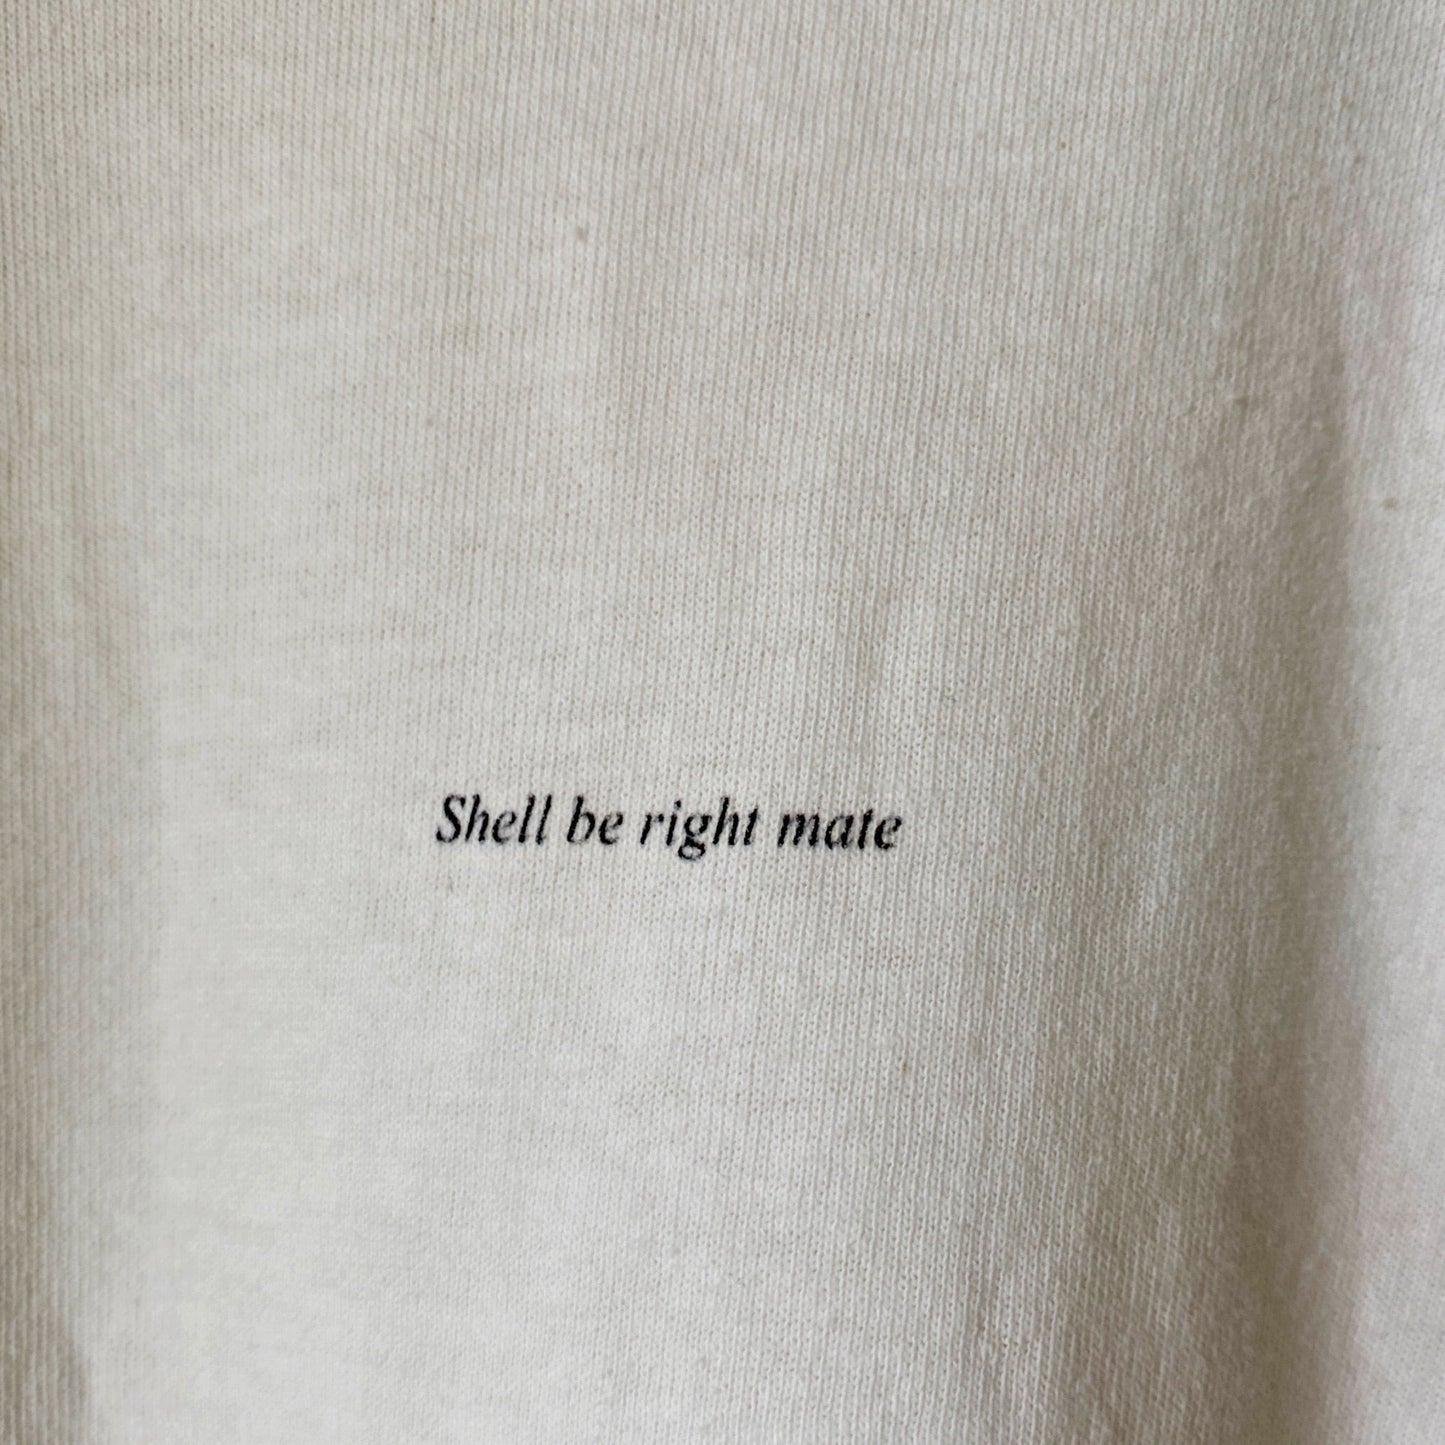 Shell be right - Word Art Tee